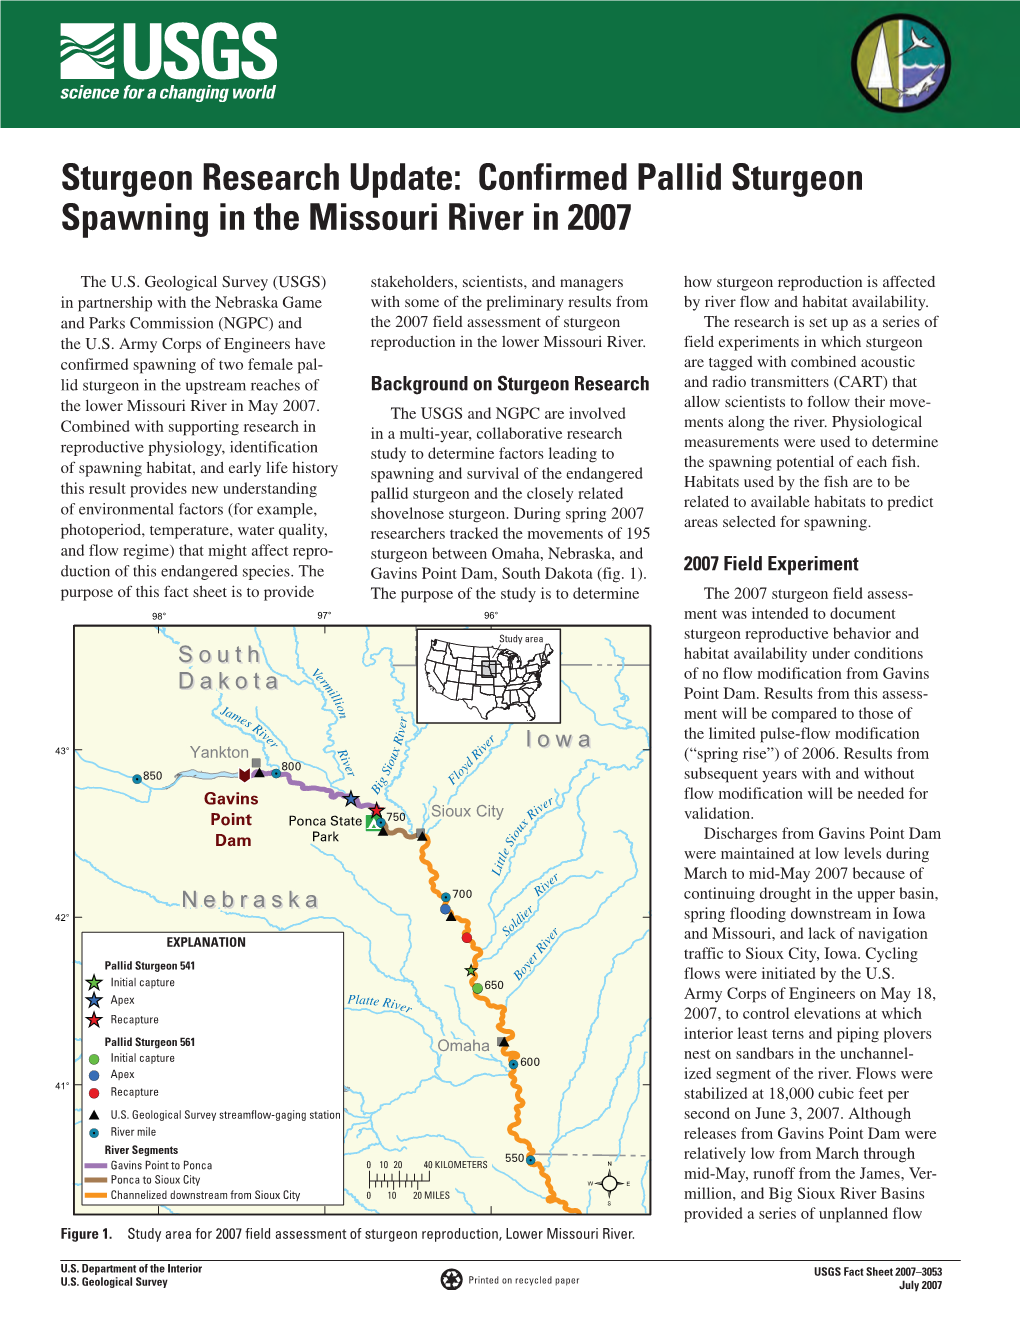 Confirmed Pallid Sturgeon Spawning in the Missouri River in 2007